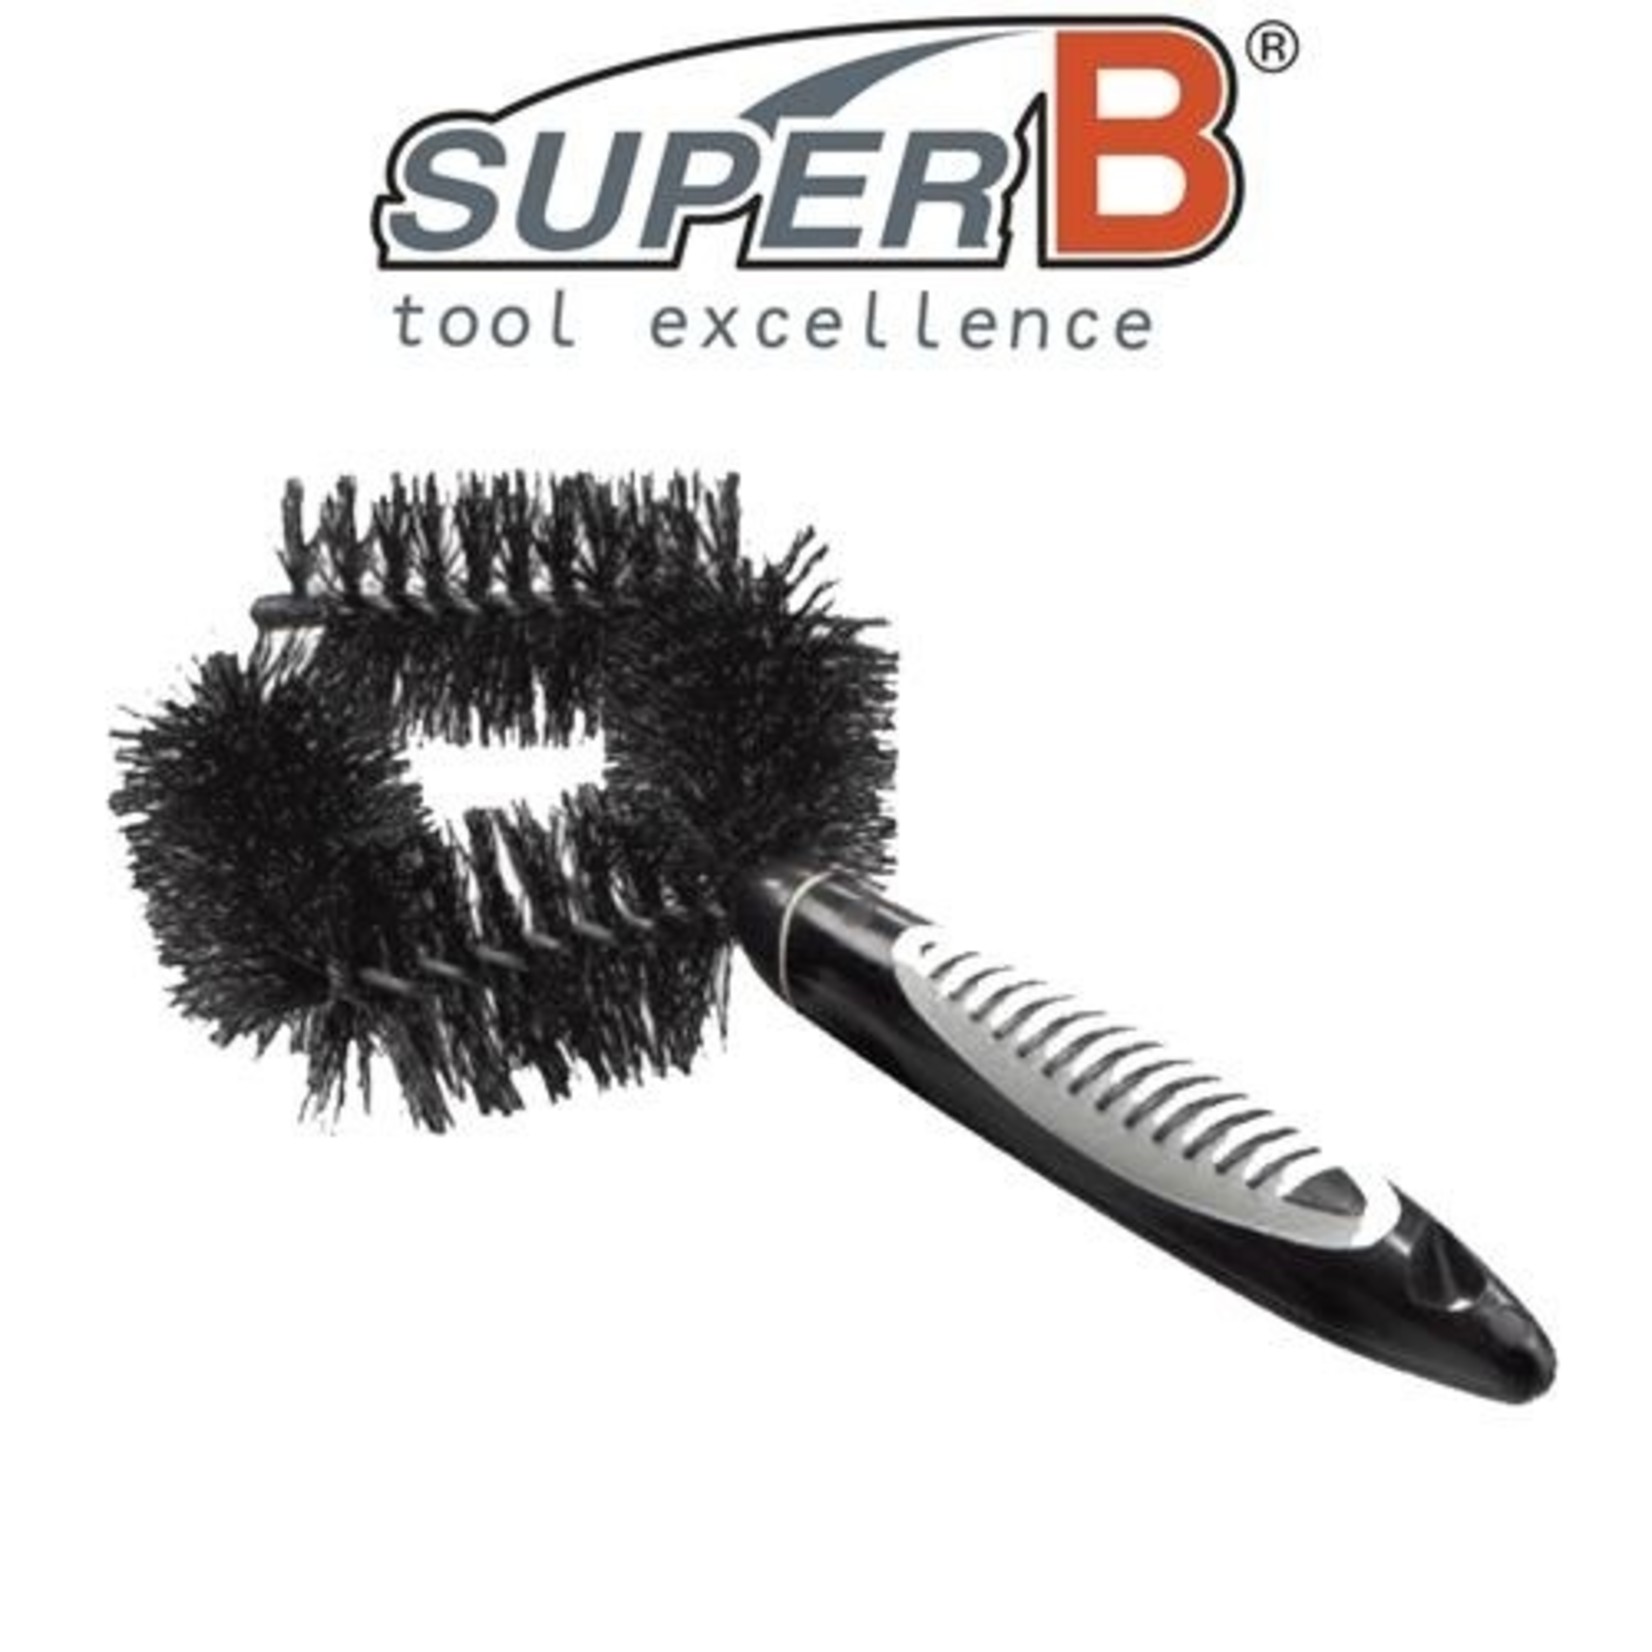 Super B SuperB Bike Cleaning Brush - O-Shaped Brush Ideal For Cleaning Tyres And Frame